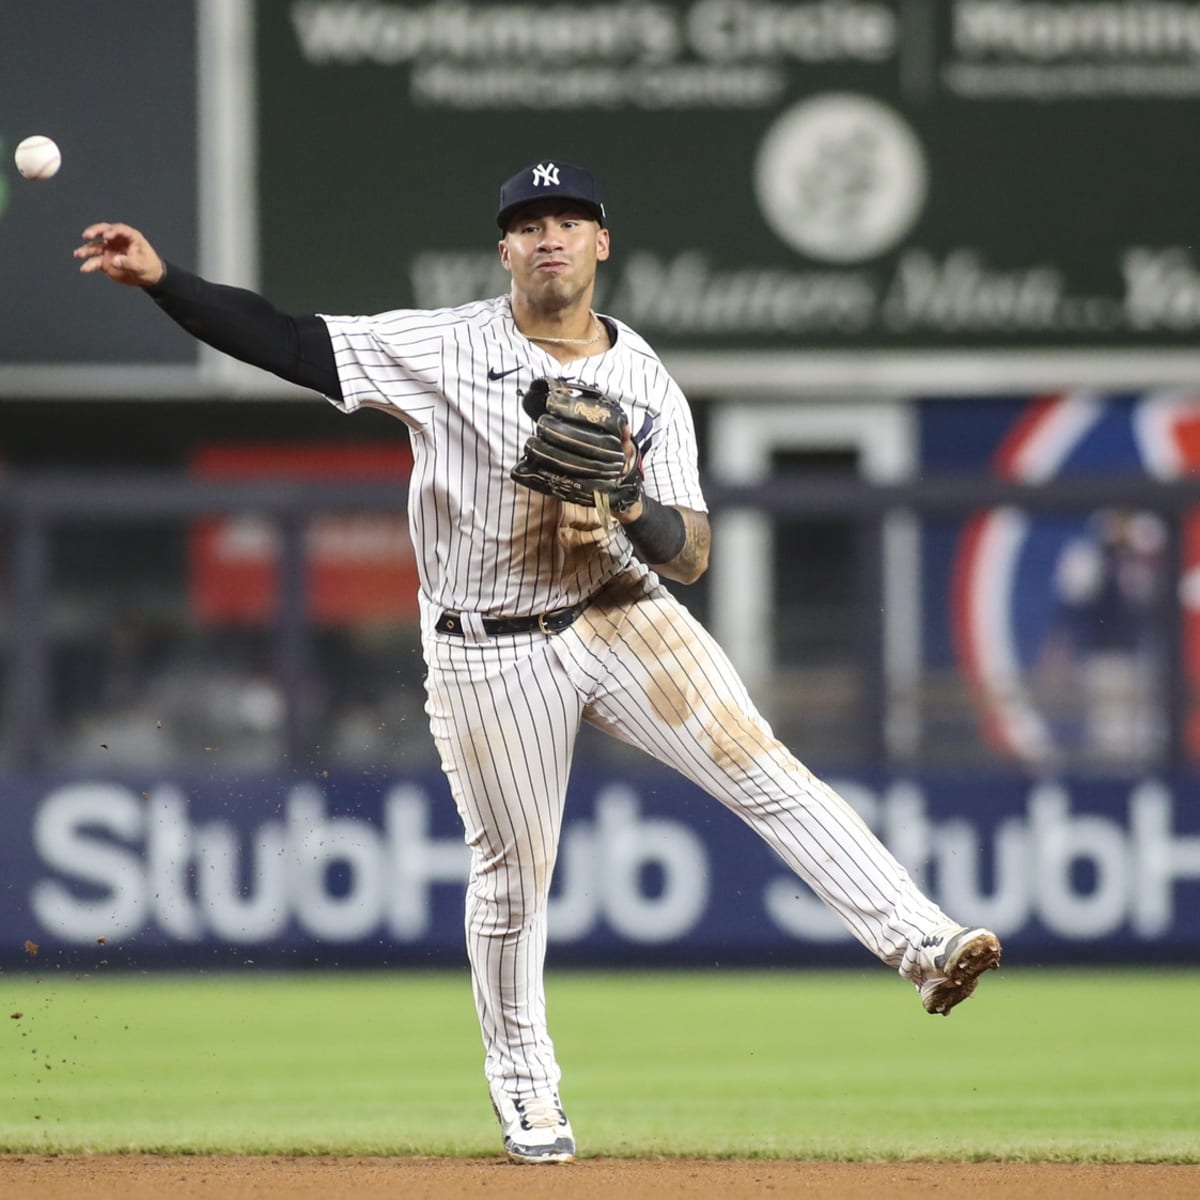 New York Yankees 2B Gleyber Torres Almost Ready to Return From Wrist Injury  - Sports Illustrated NY Yankees News, Analysis and More